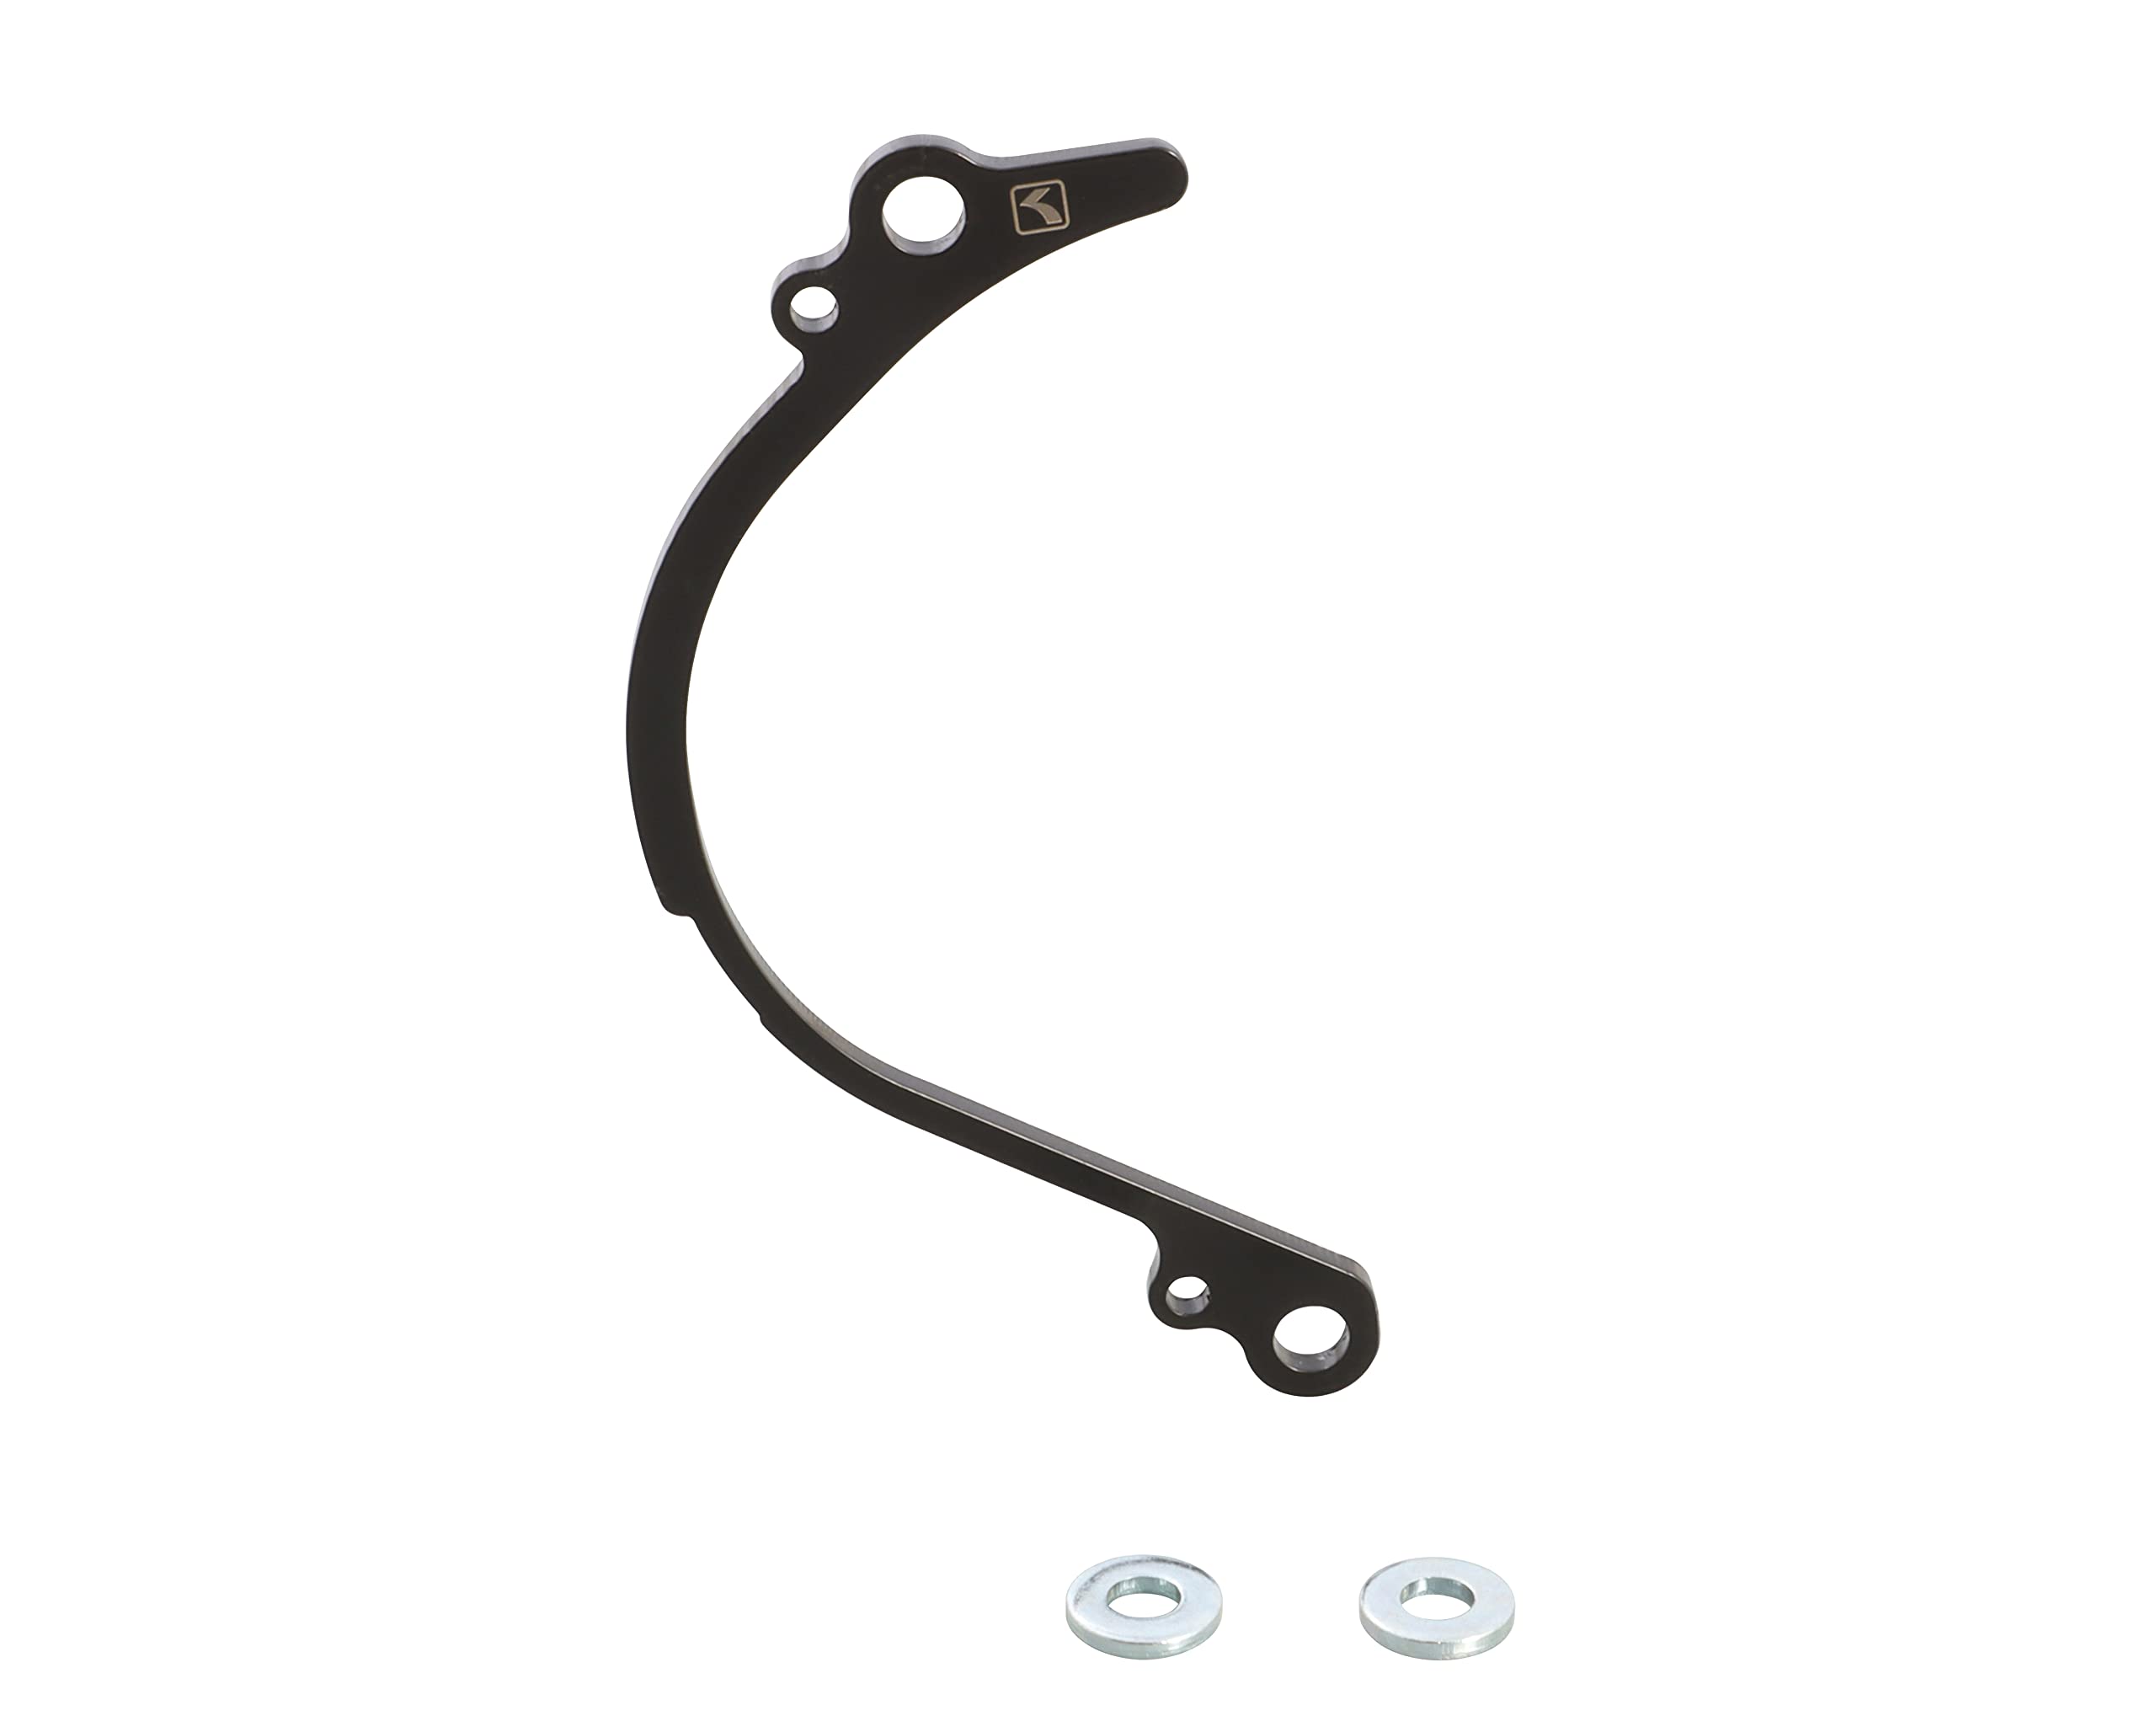  Kitaco (KITACO) wide chain guide plate steel made black washer attached Cross Cub 110(JA60)/ Super Cub 110(JA59)